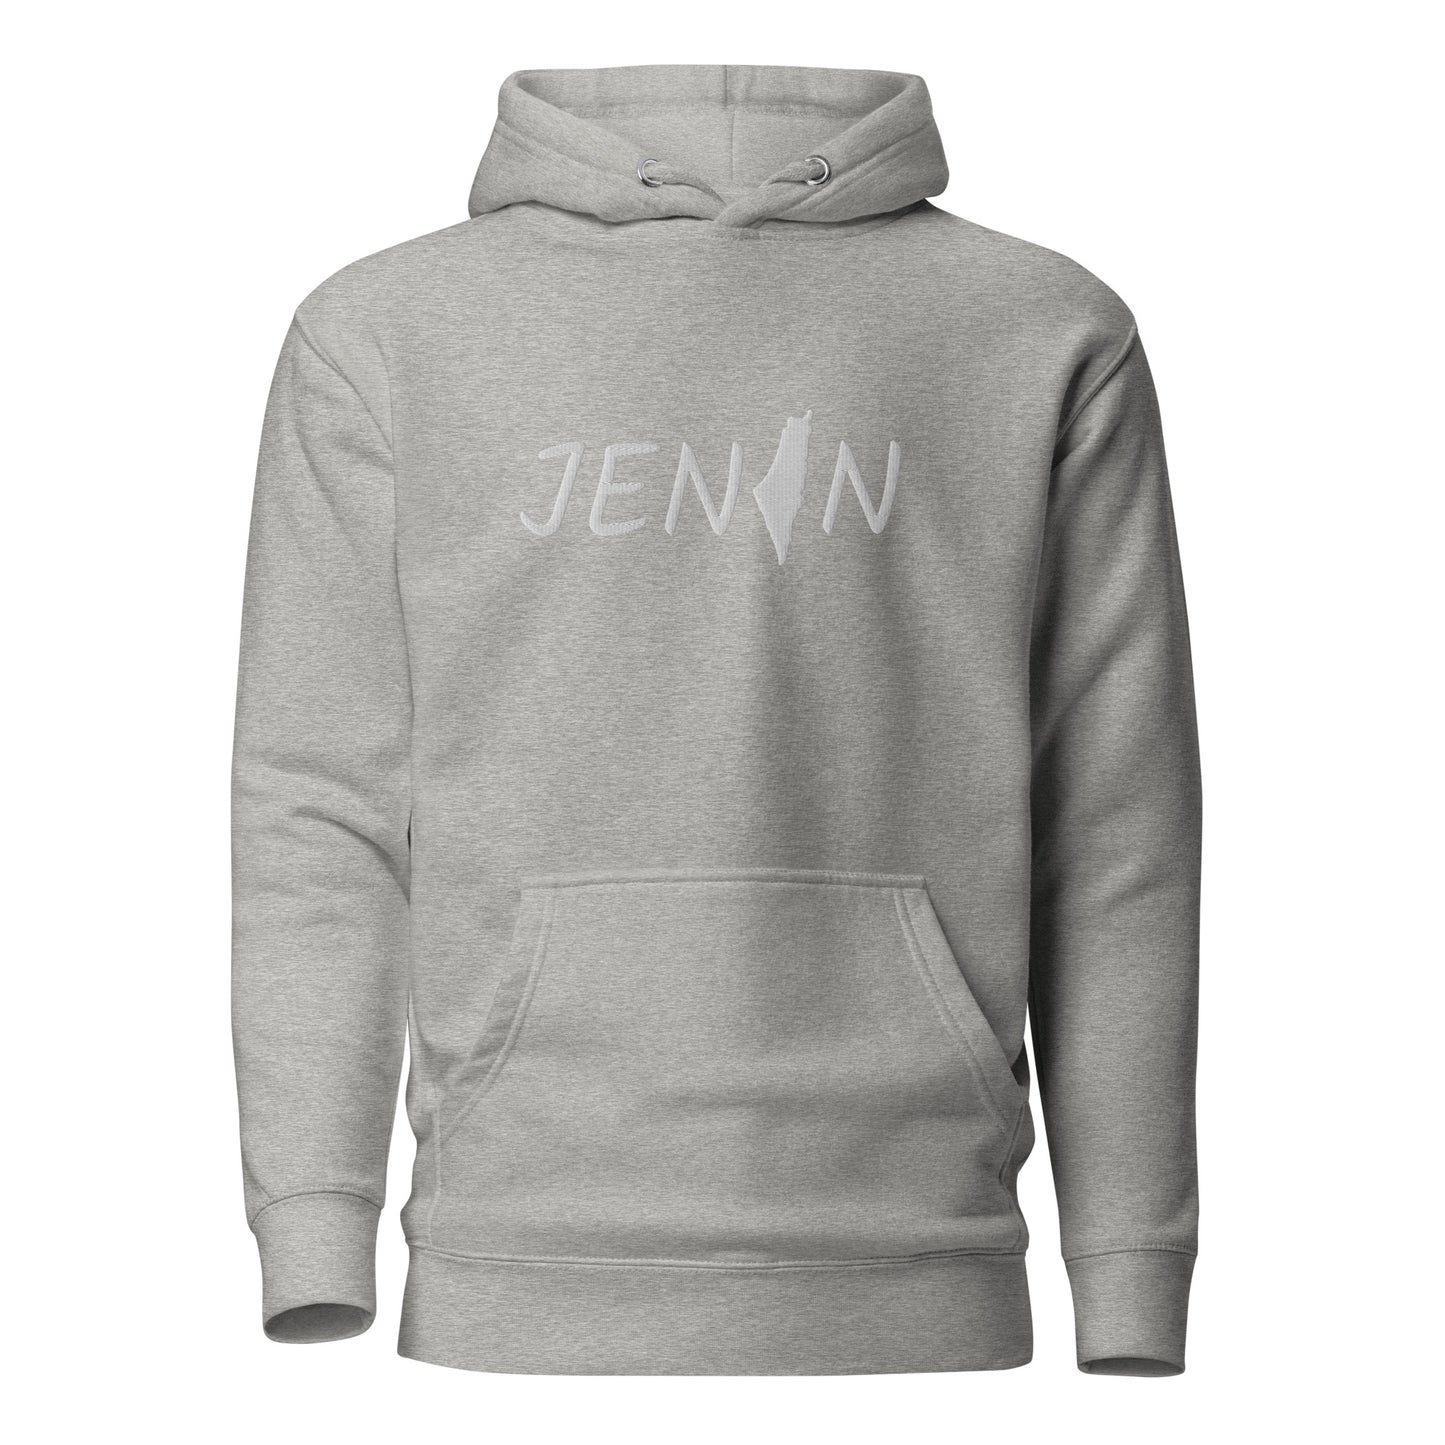 Jenin and Map Hoodie By Halal Cultures